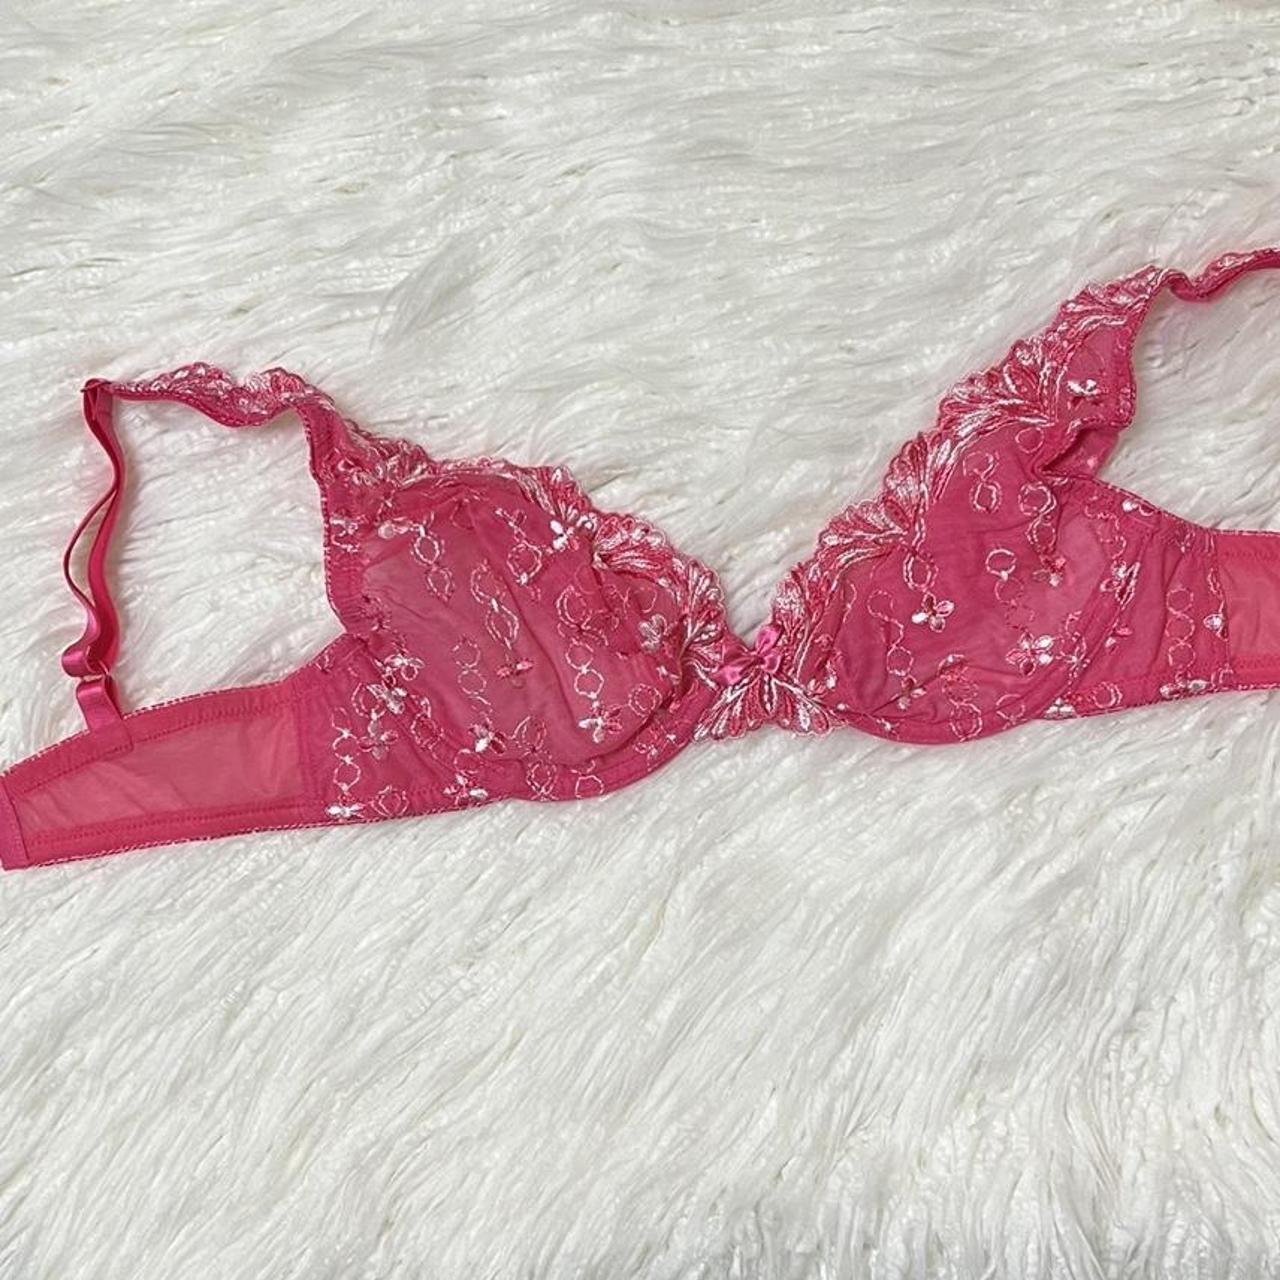 Frederick's of Hollywood Women's Pink Bra